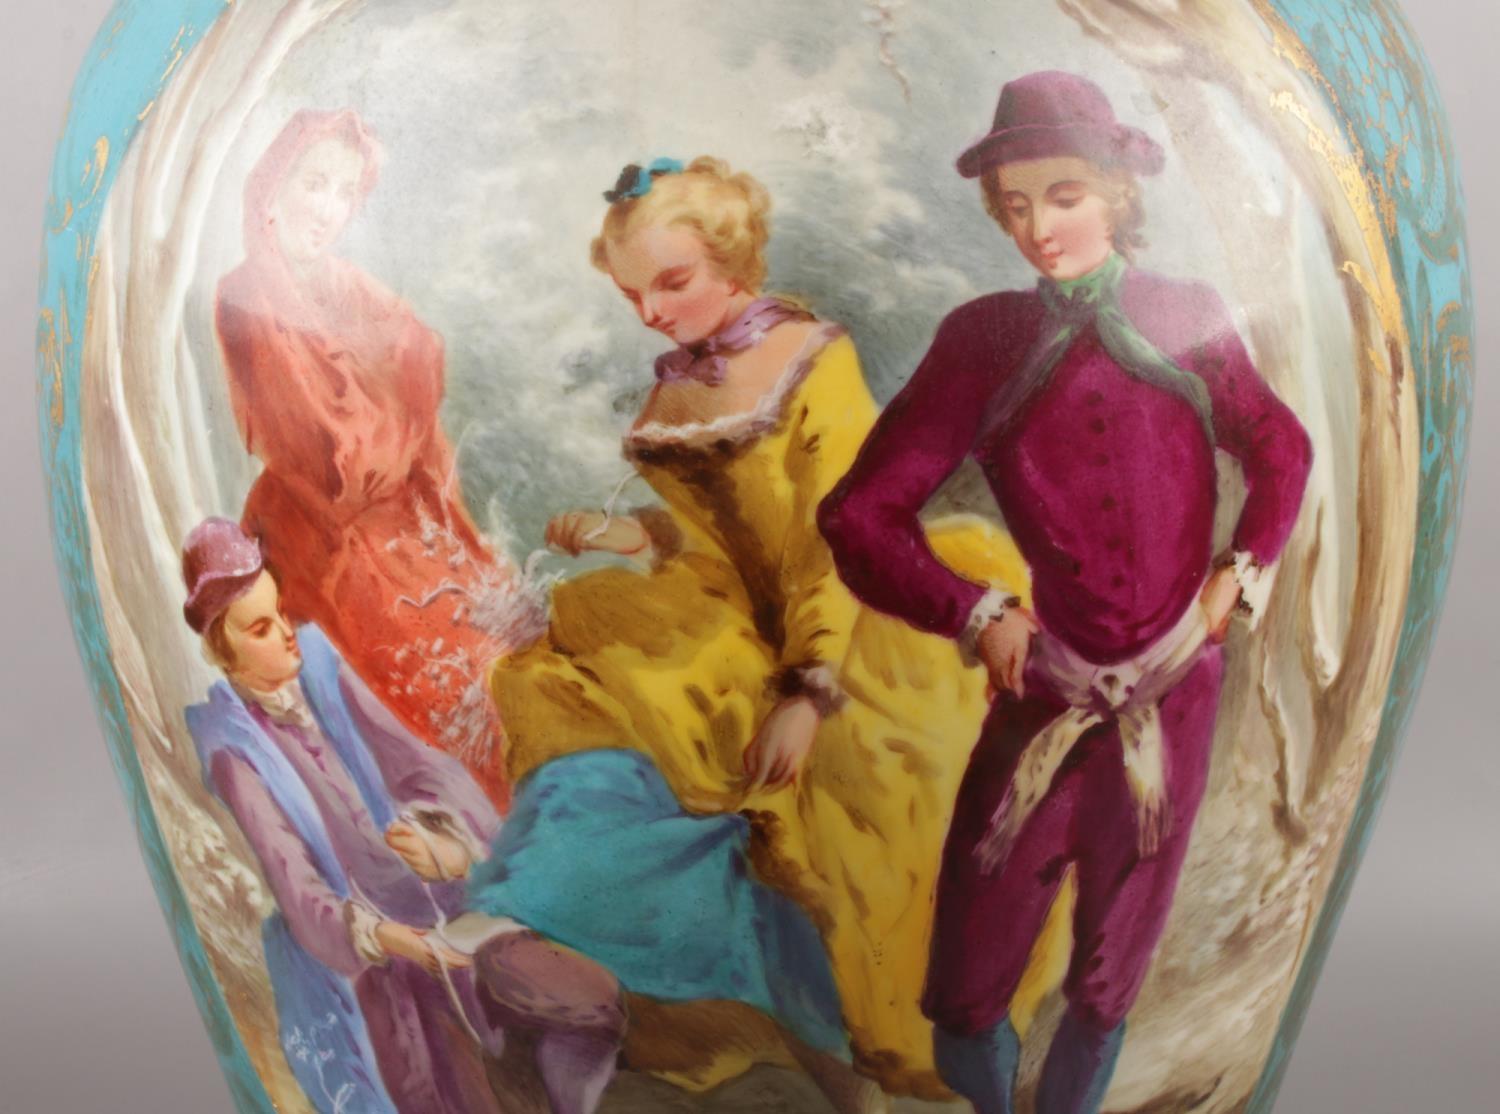 A large 19th century French Sevres style vase, with hand painted panels depicting figures and - Image 2 of 5